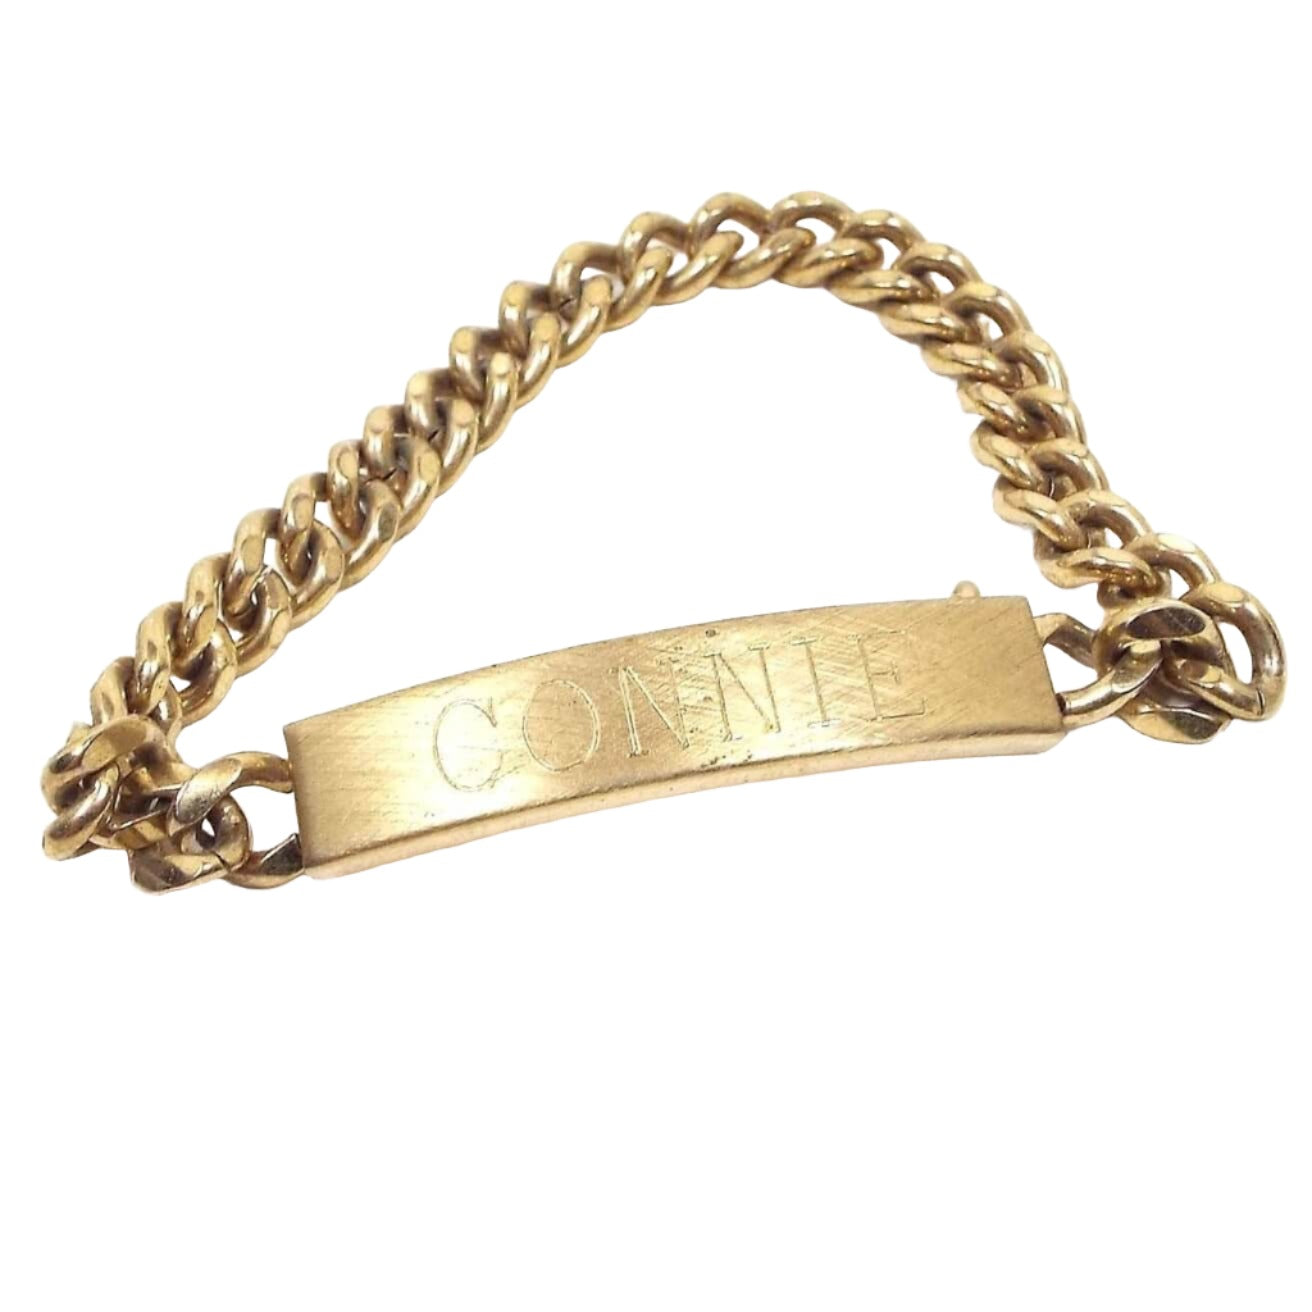 Front view of the Mid Century vintage Speidel ID bracelet. It is gold tone in color. The front curved bar has a brushed matte textured appearance and has the name Connie engraved on the front. There are some tiny spots and scuff scratches from age when viewed closely. 